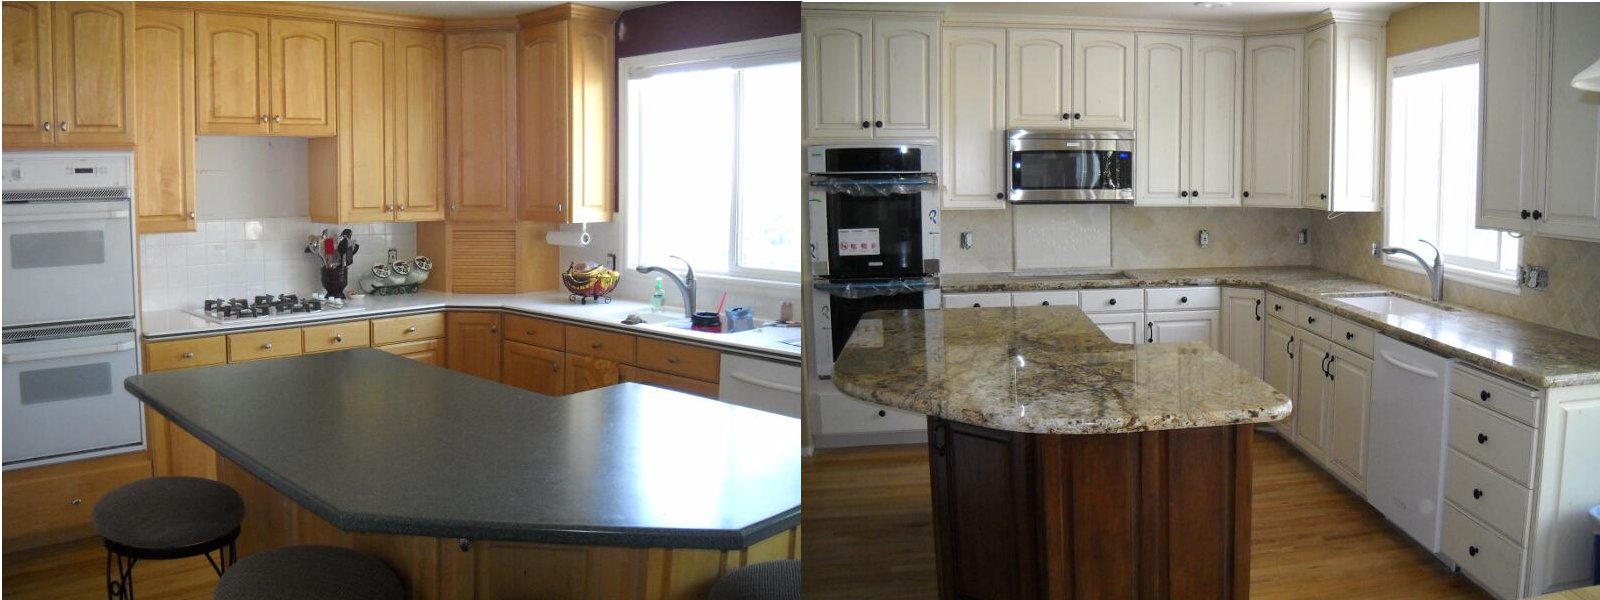 Refinished Cabinets Before And After Kitchen Design Ideas